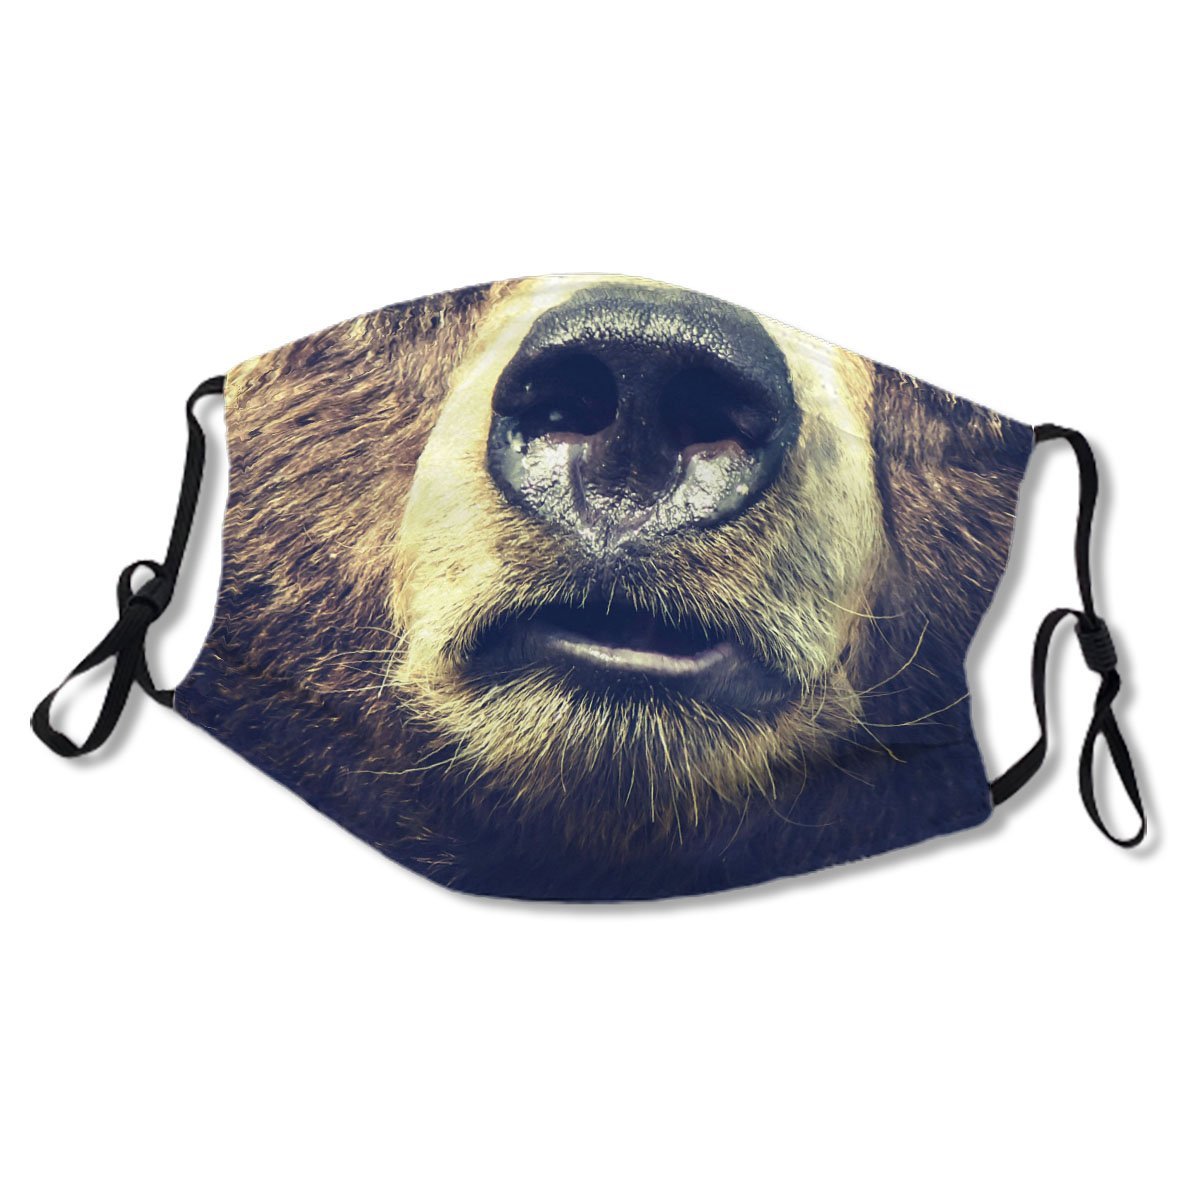 Scary Grizzly Bear Face Halloween No. 4NOFVN - GetLoveMall cheap ...